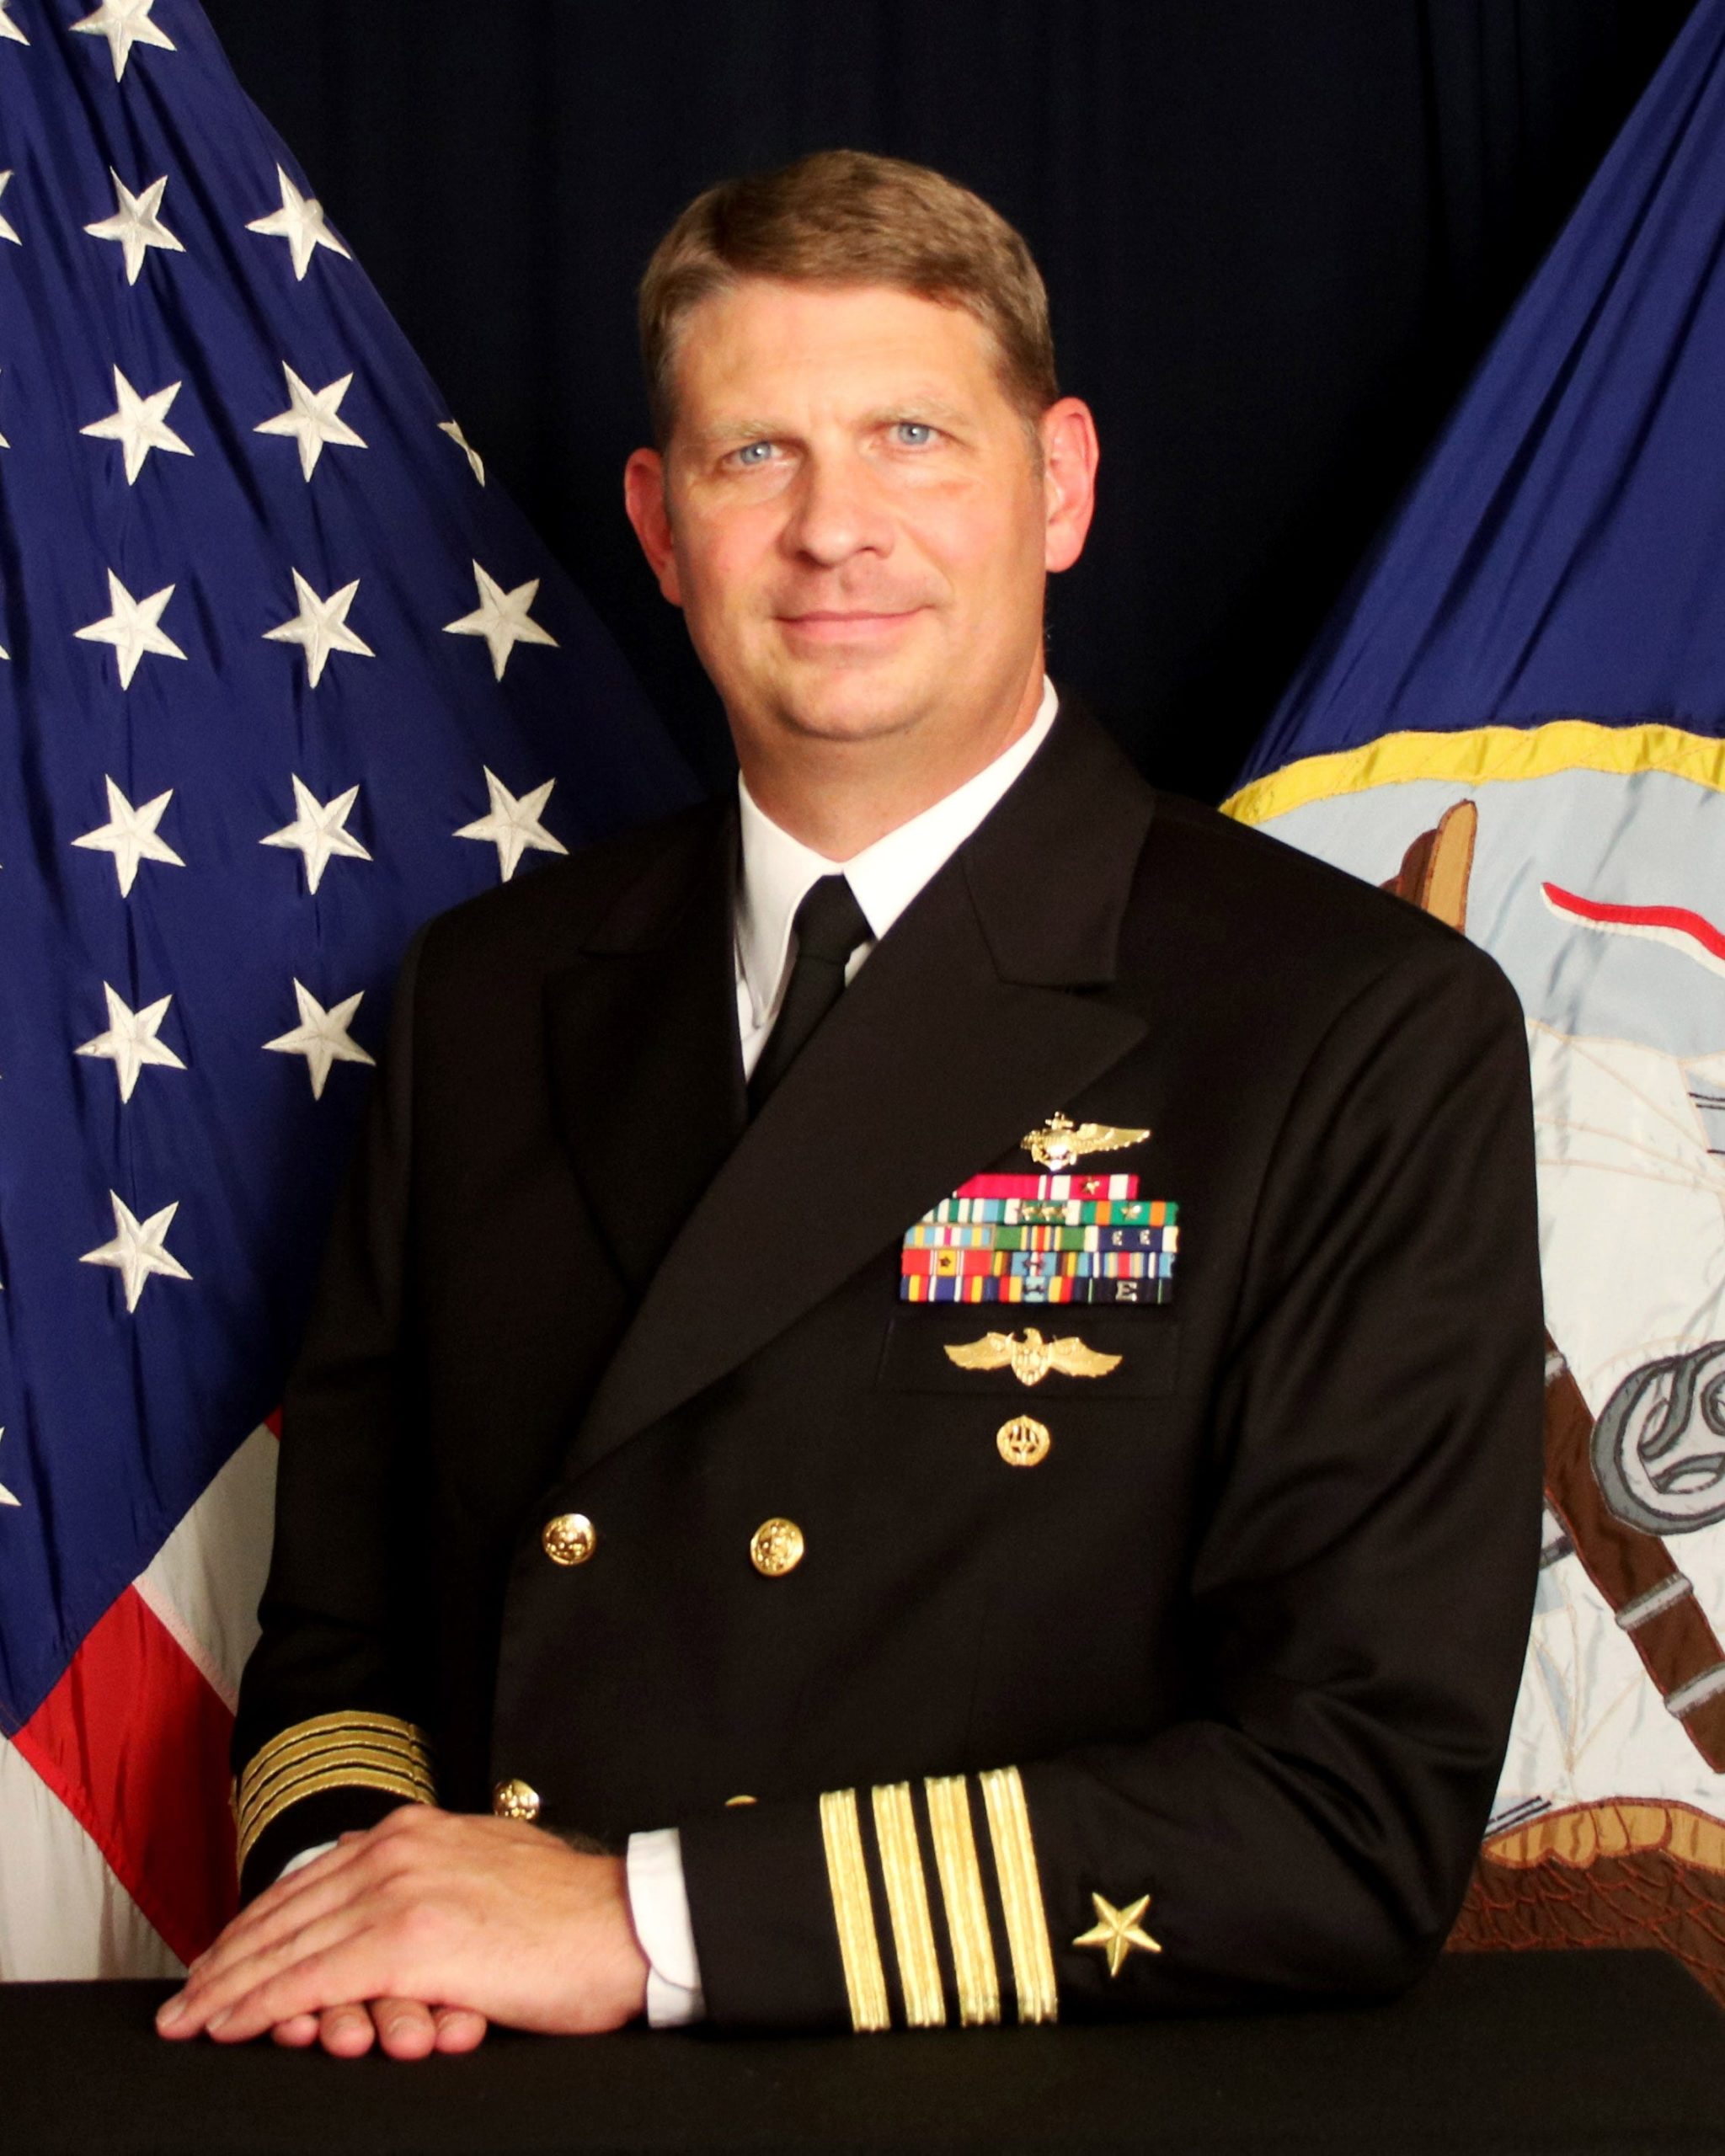 Capt. Paul Bowdich is the current NAS Whiting Field Commanding Officer since December 2017 [PHOTO COURTESY OF U.S. NAVY]